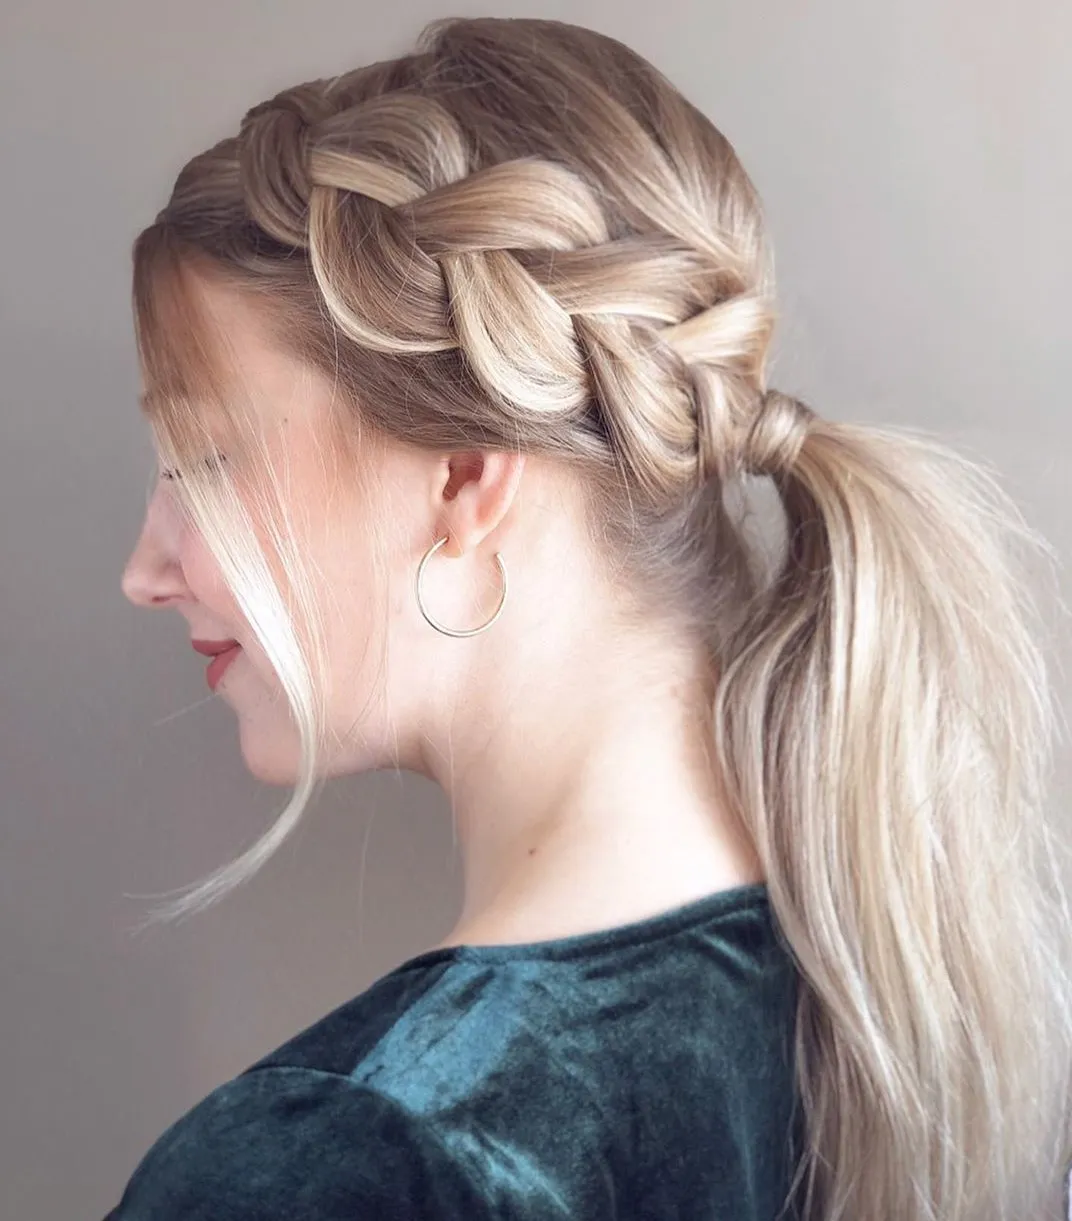 4 Ways to Do Simple, Quick Hairstyles for Long Hair - The Tech Edvocate